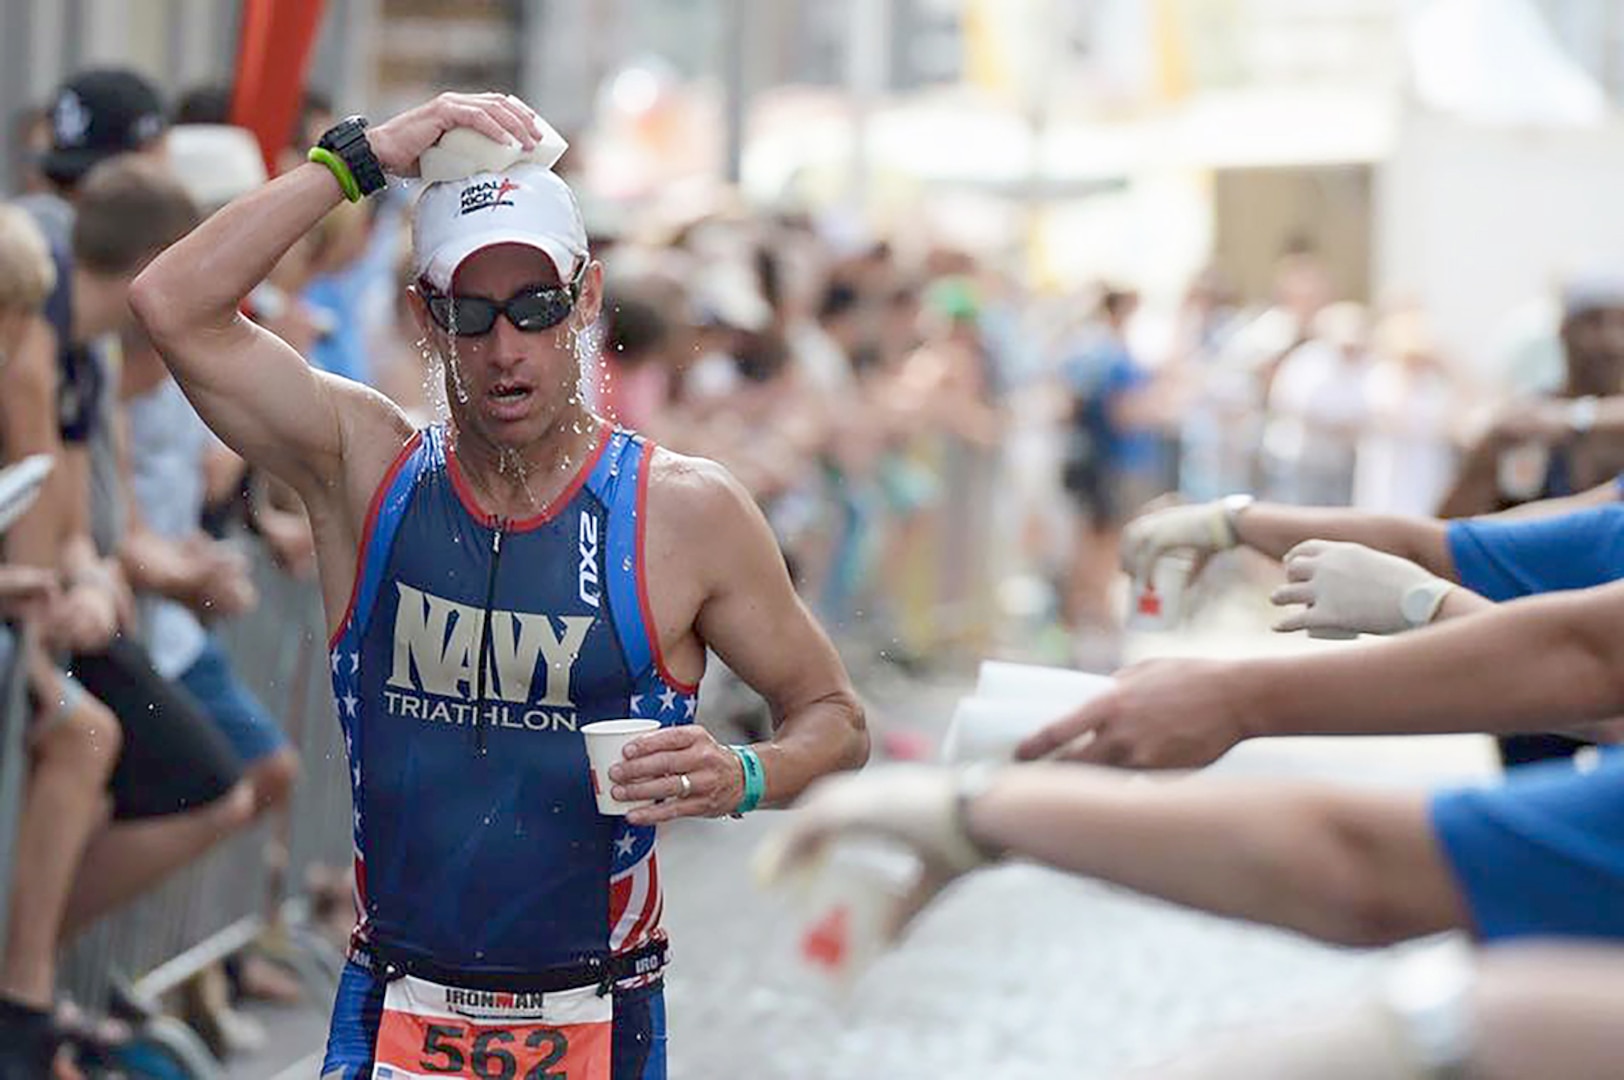 Navy Lt. Cmdr. Ryan Stickel wipes the sweat from his brow during an Ironman triathlon.